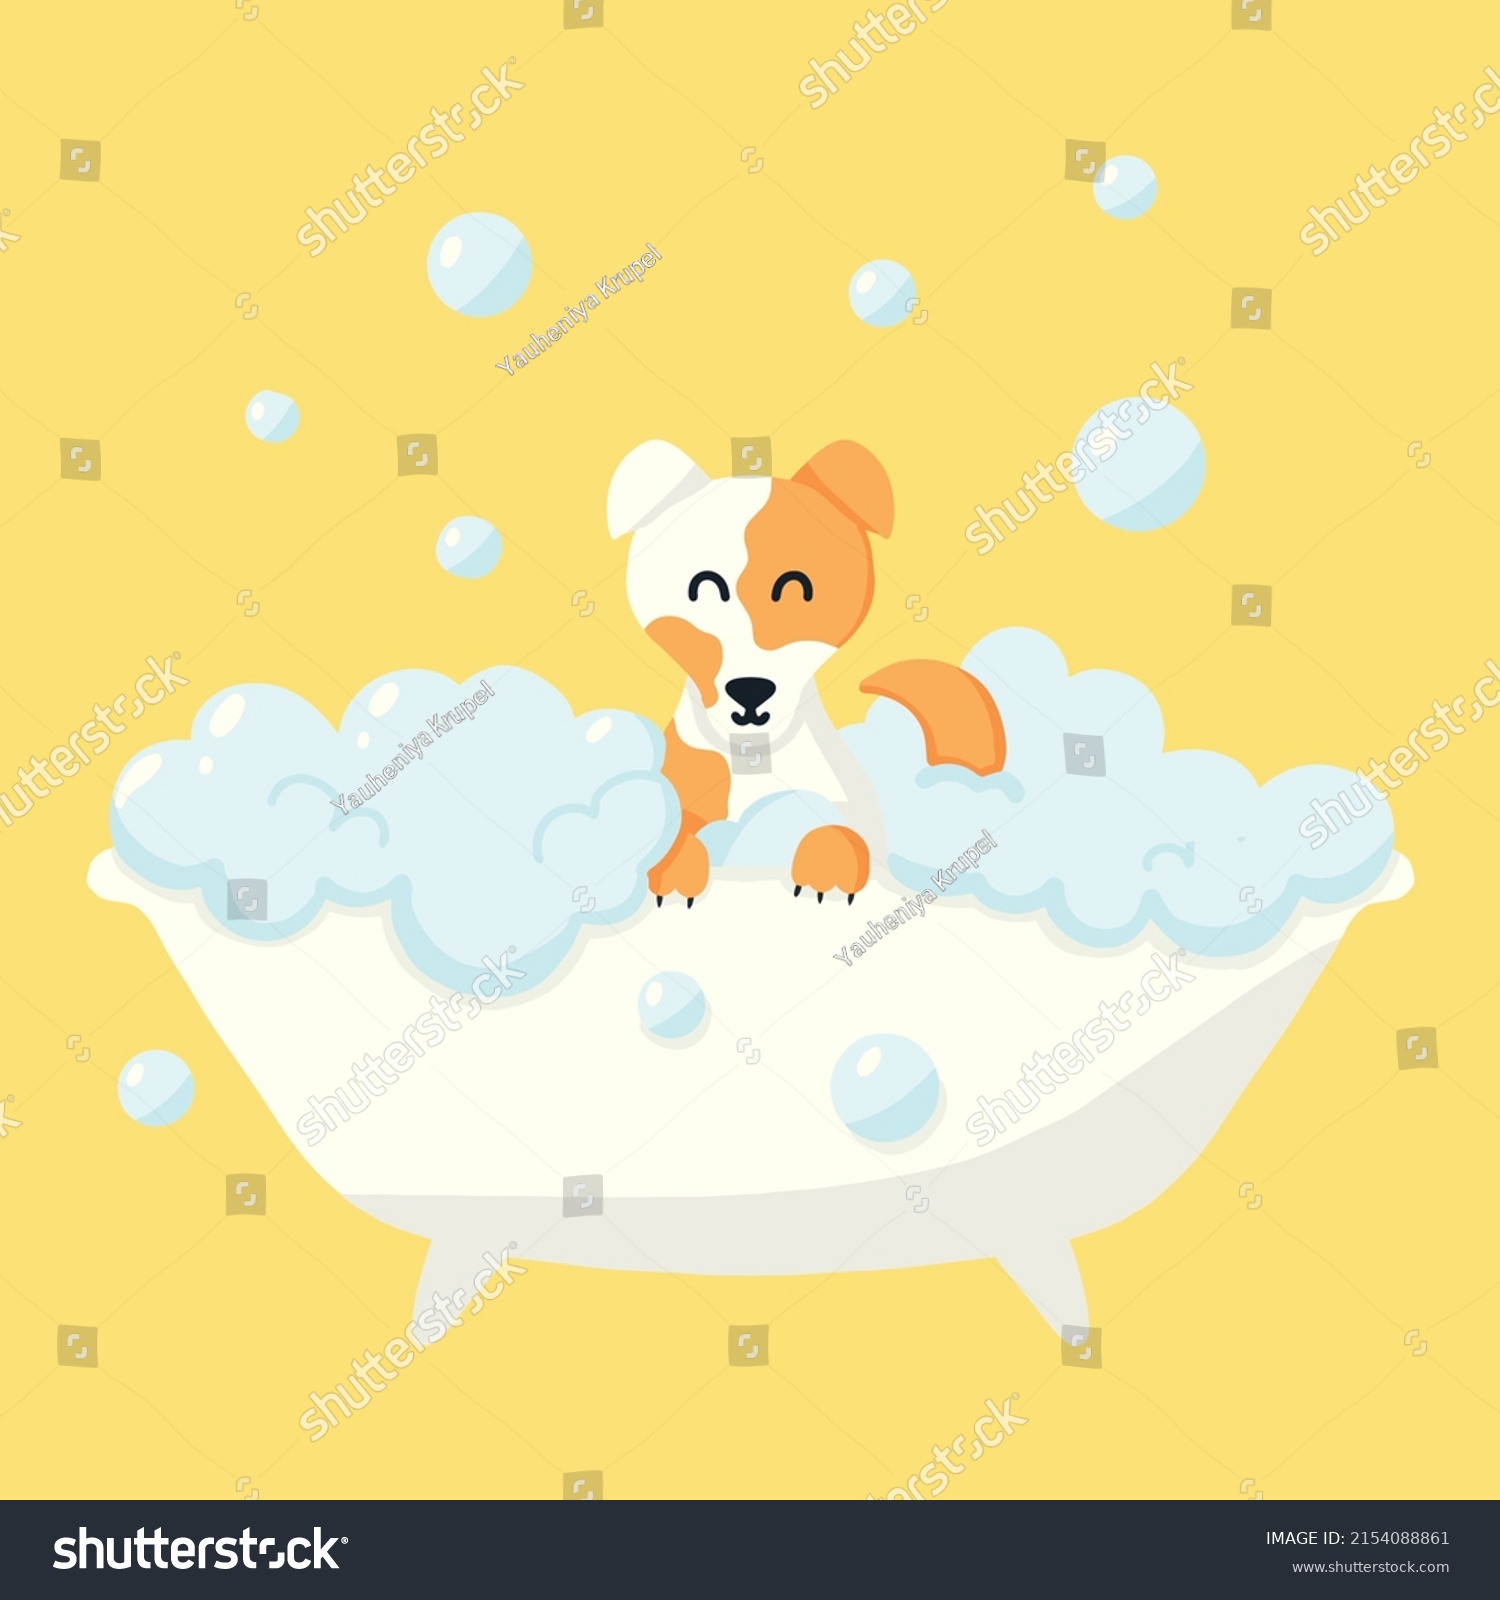 SVG of Dog in a bubble bath. Pet care. Bathing the dog in the bathroom. Vector illustration in cartoon style. svg